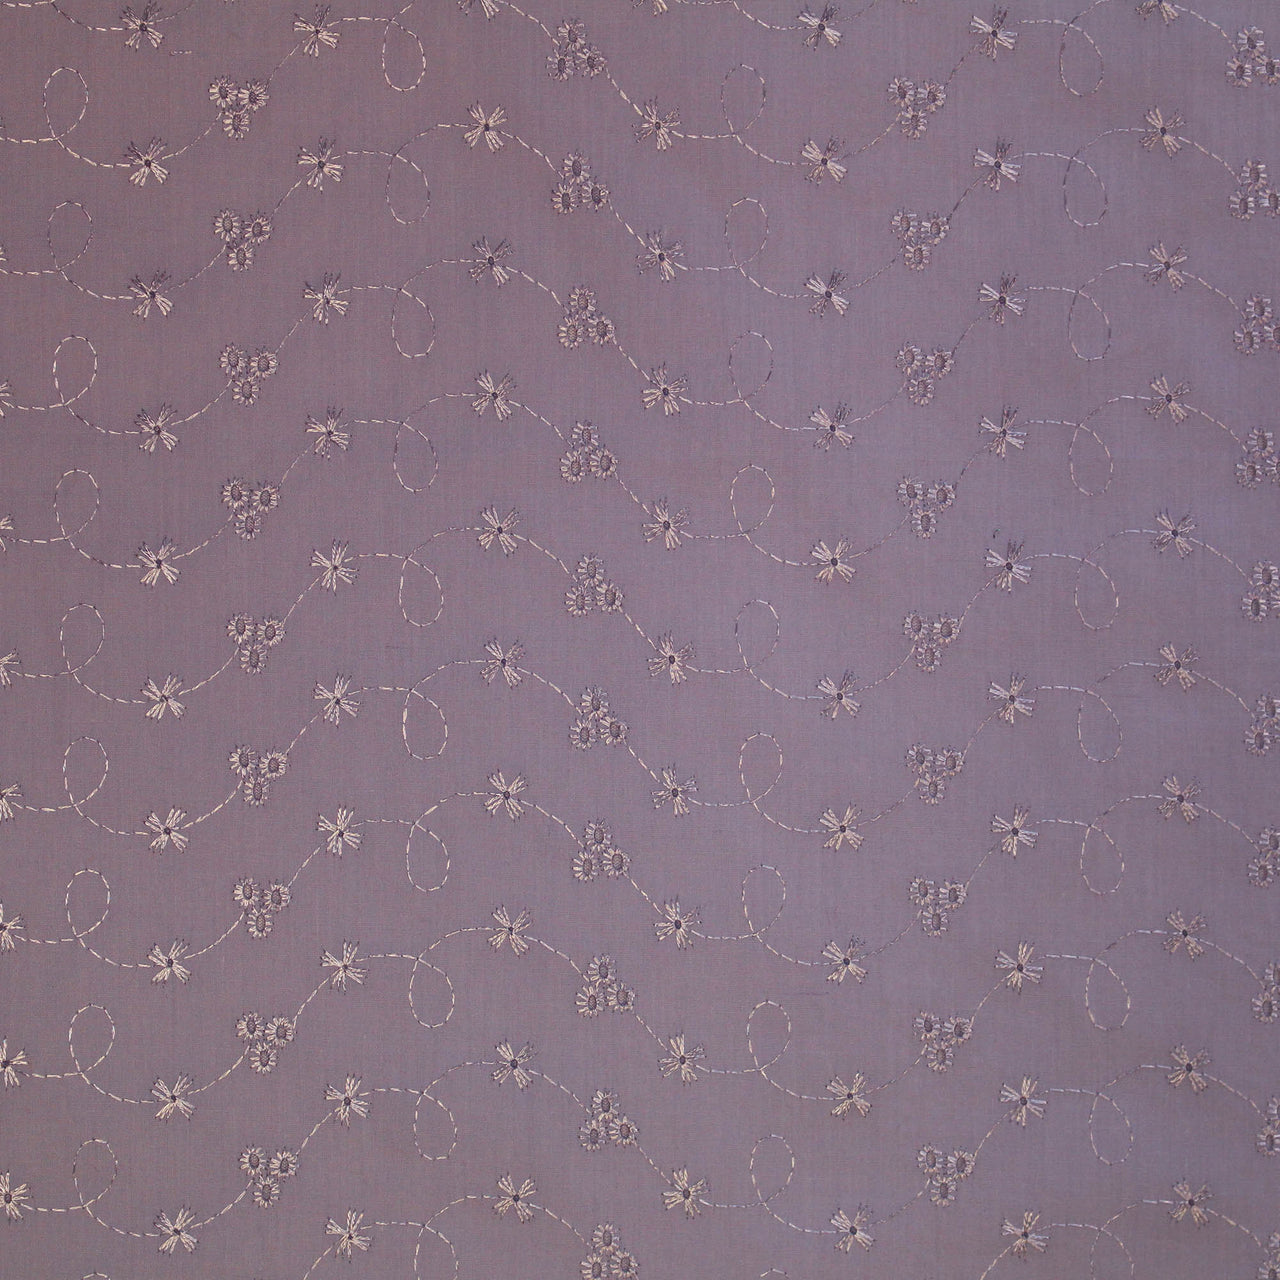 Lilac - Broderie Anglaise - 3 Hole Embroidered Poly Cotton Fabric